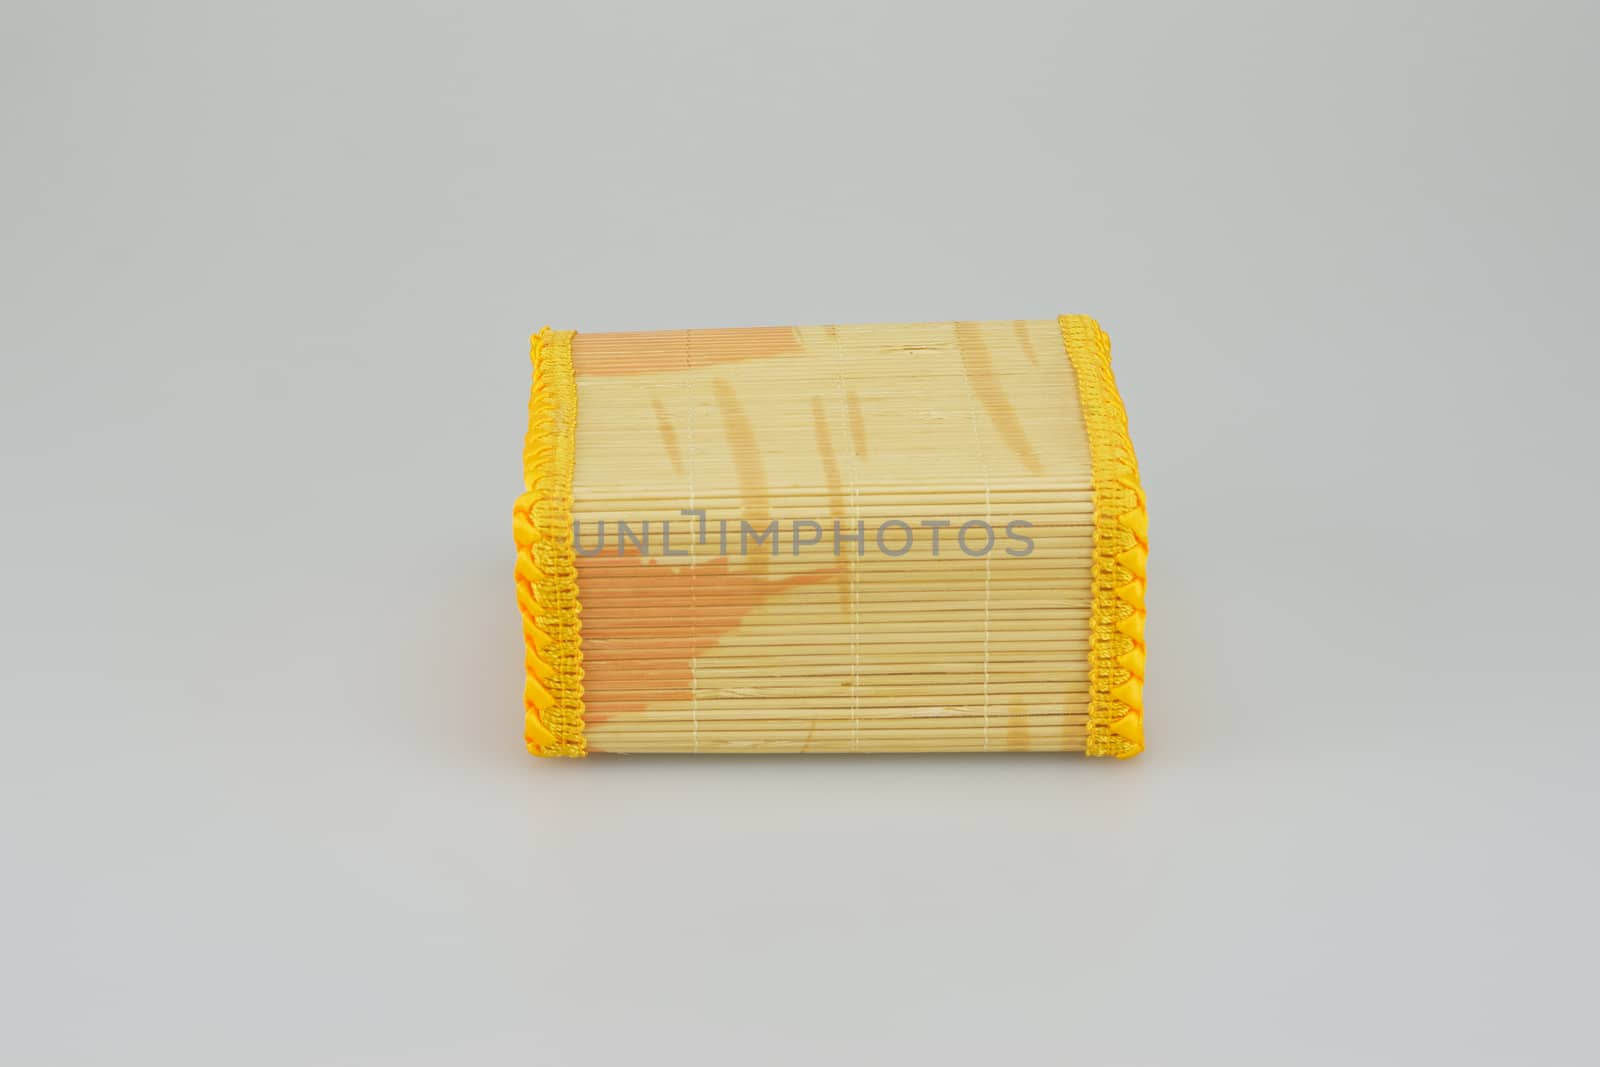 Square shaped bamboo box  on white background, handicraft from Thailand.